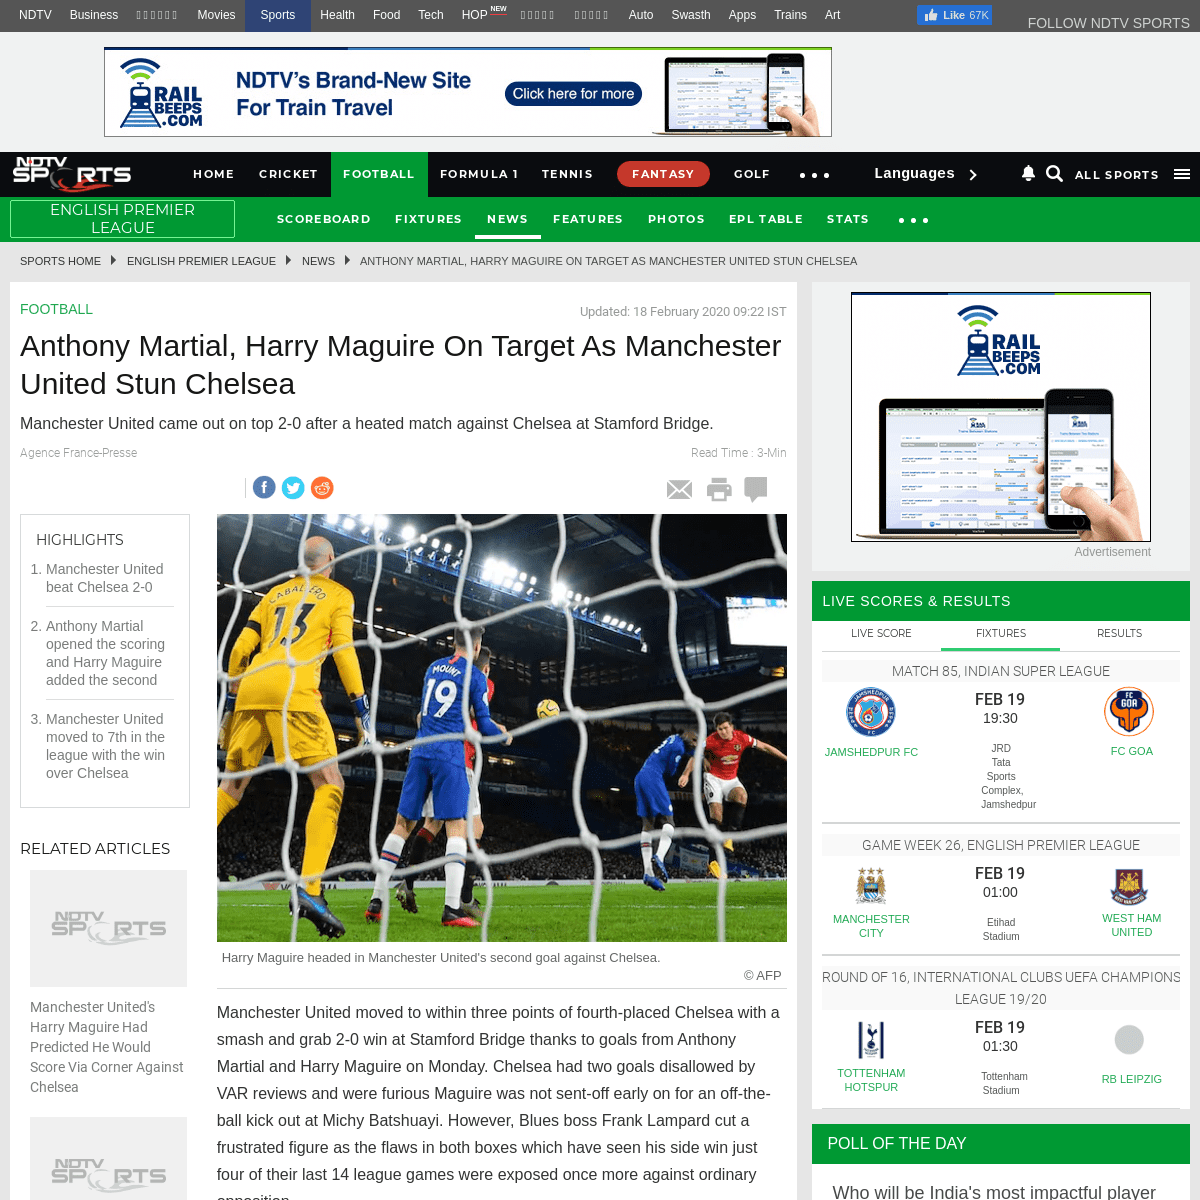 A complete backup of sports.ndtv.com/english-premier-league/chelsea-vs-man-united-anthony-martial-harry-maguire-on-target-as-man